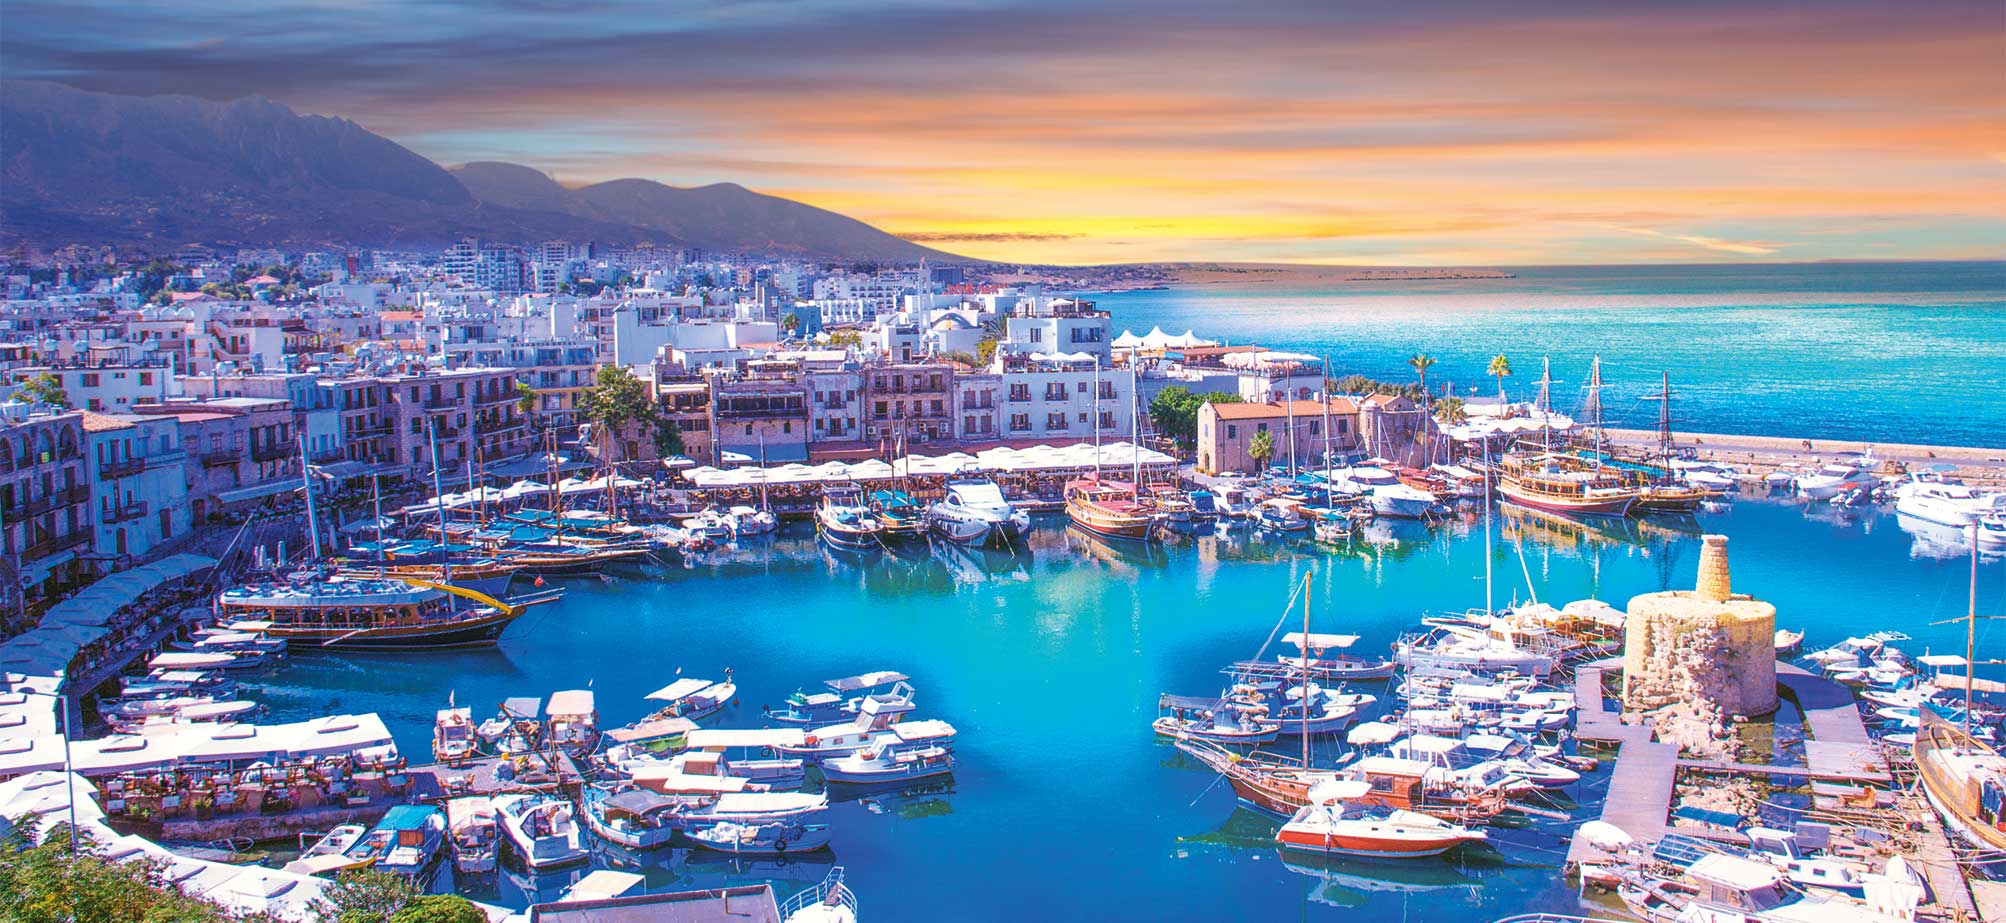 escorted tours to cyprus